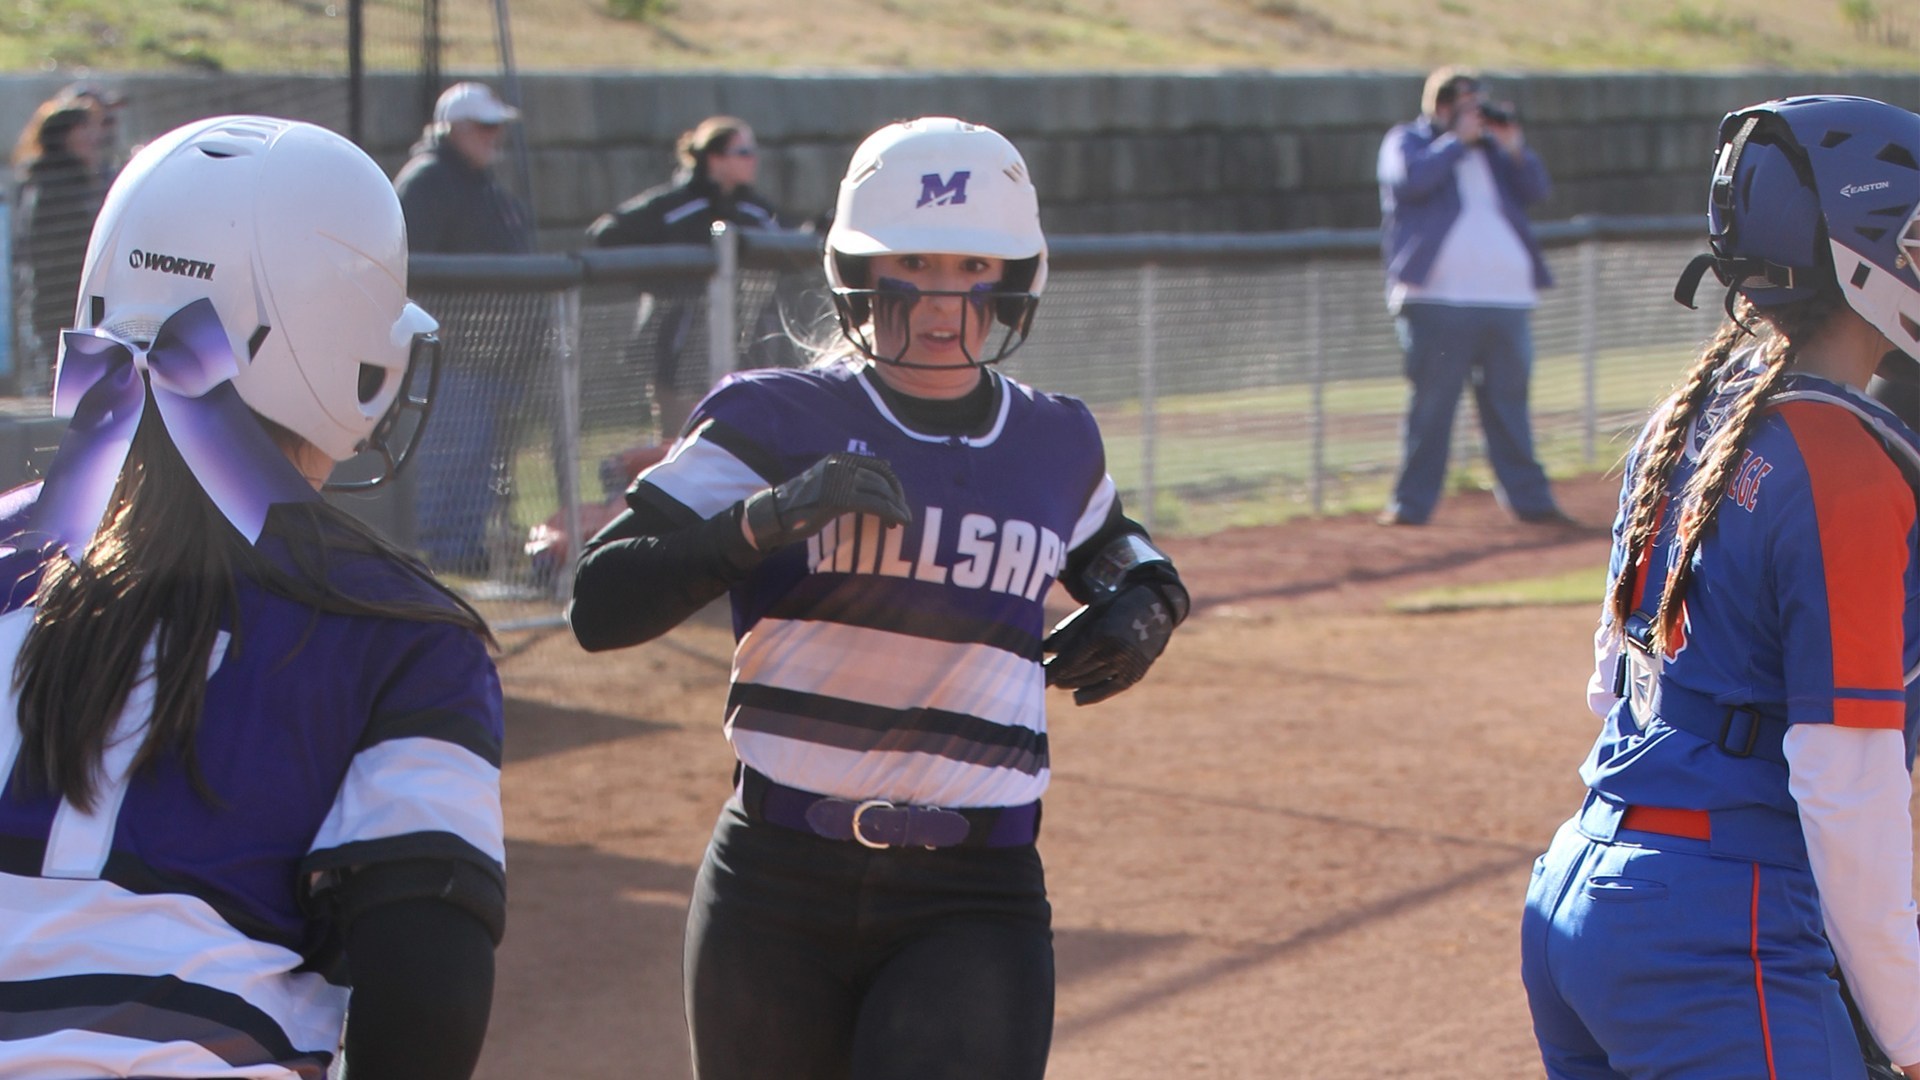 You are currently viewing Millsaps Softball Season off to Solid Start